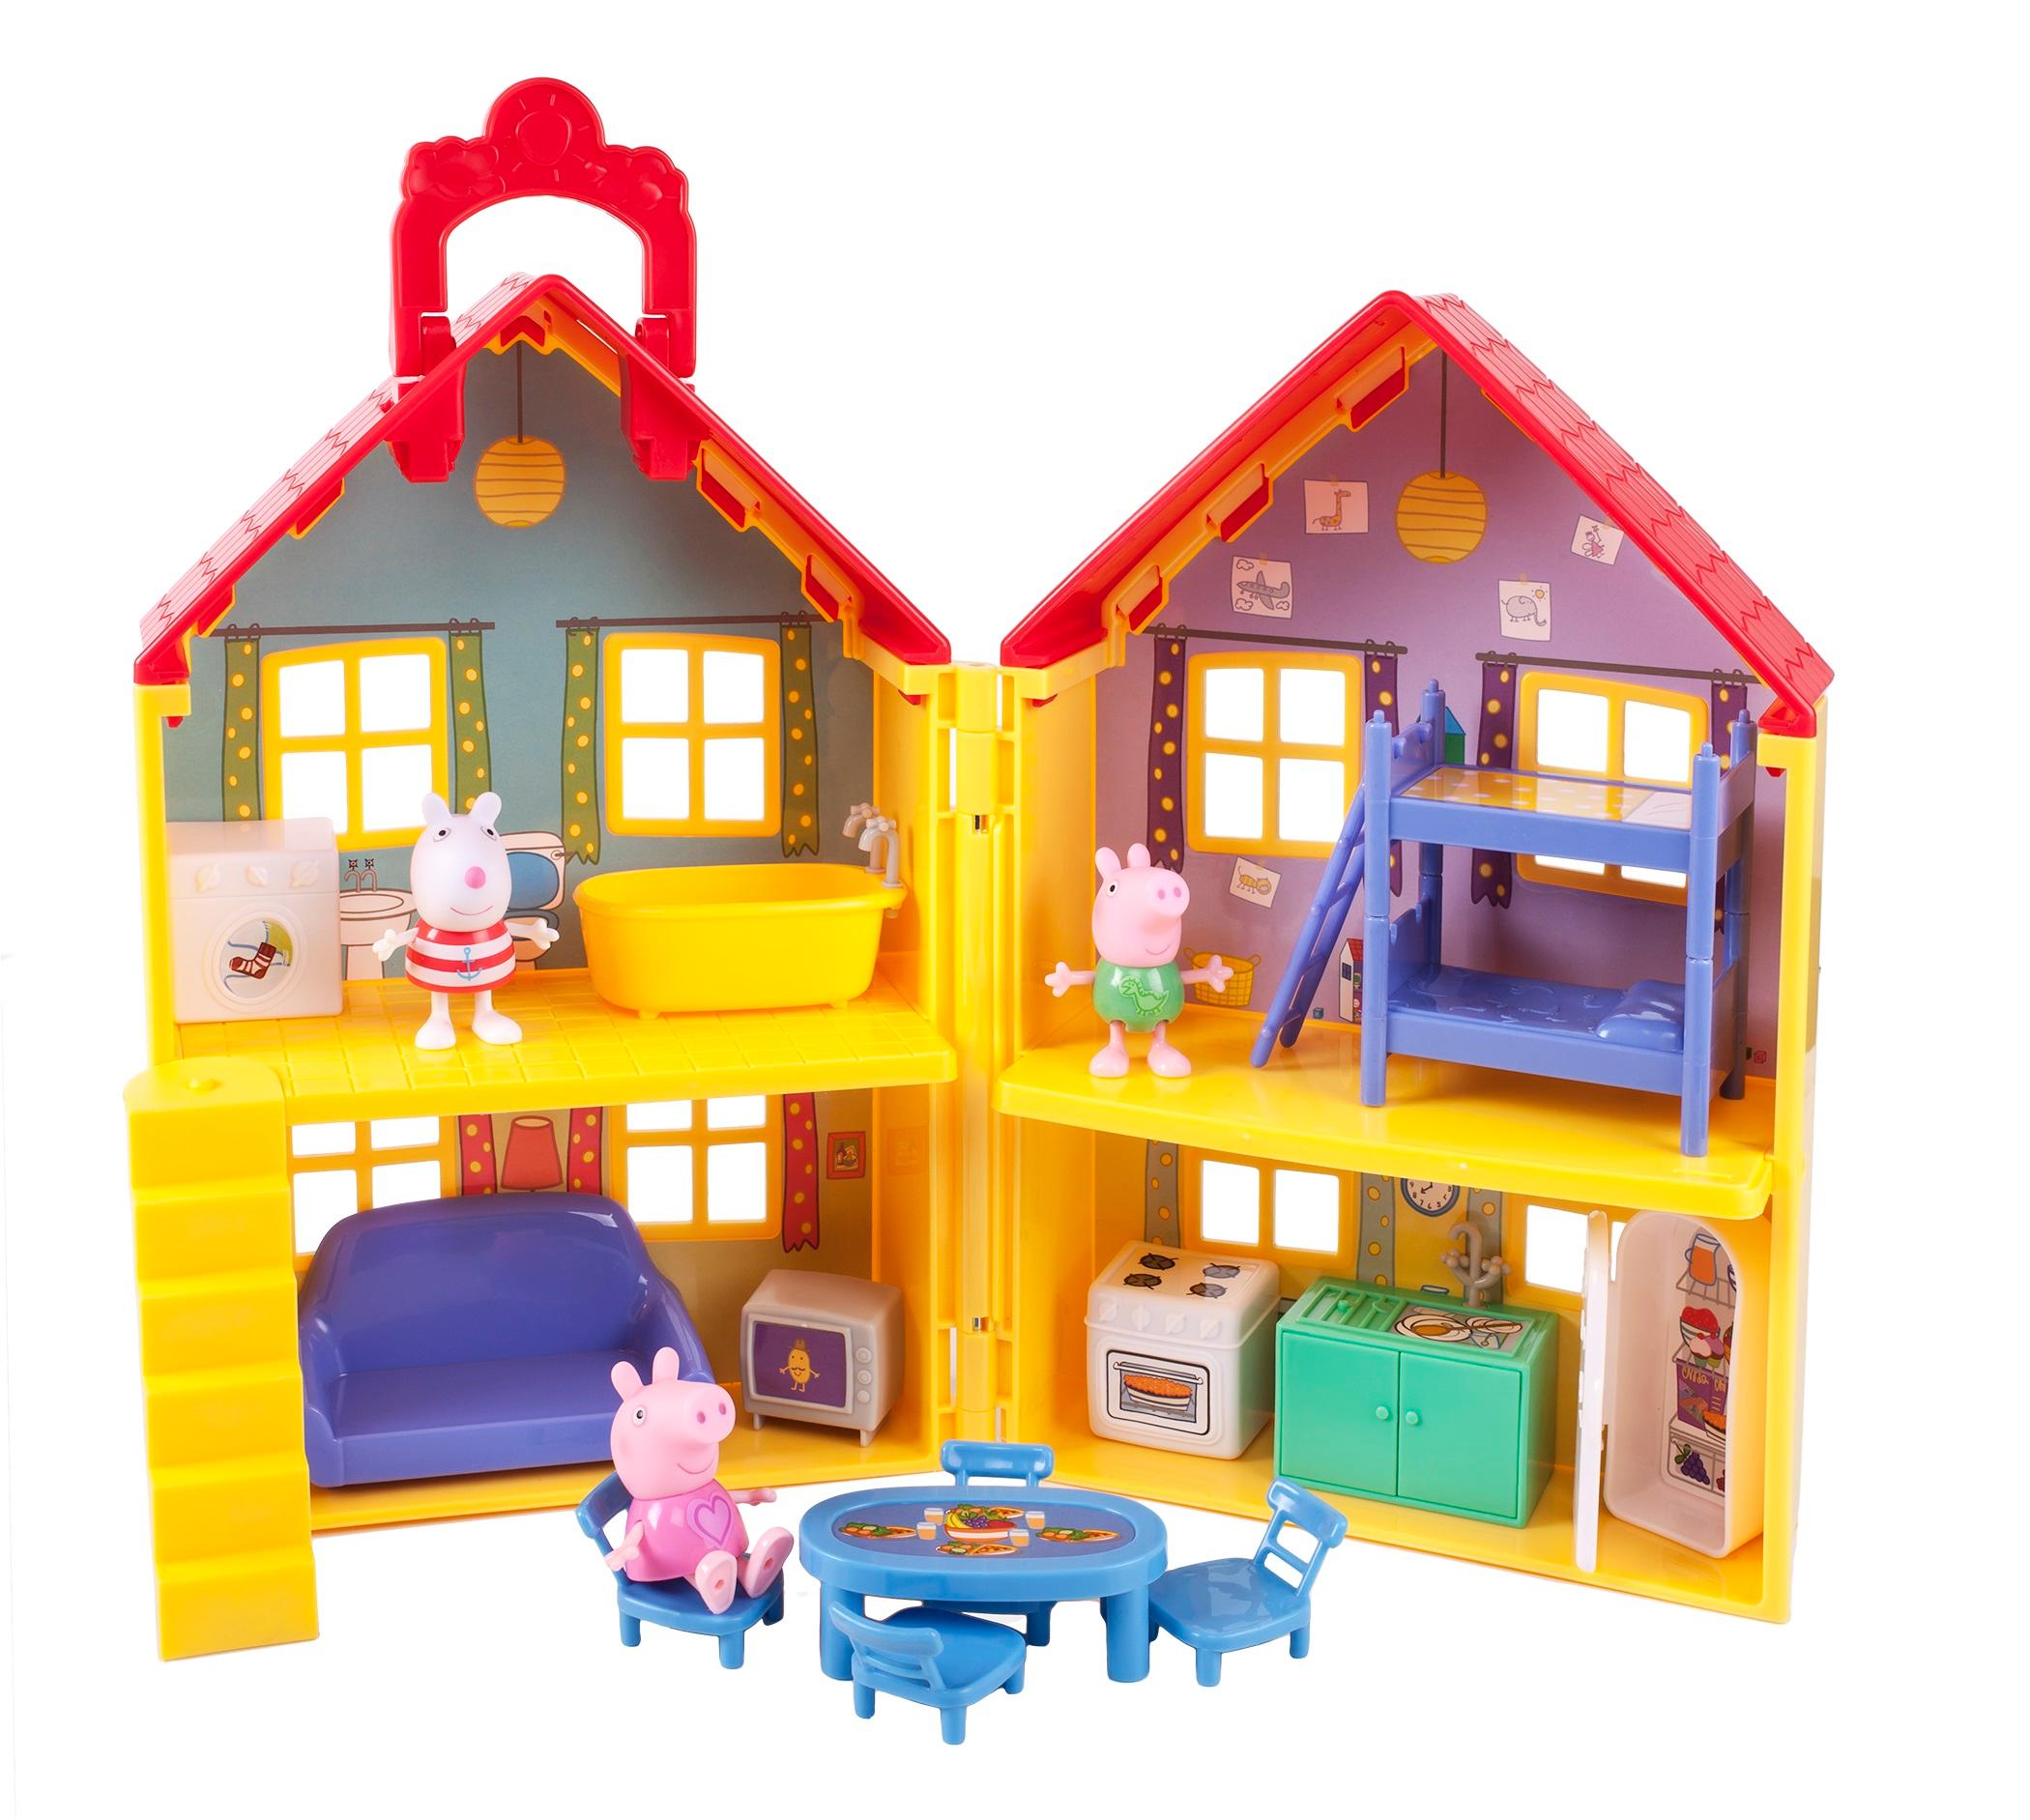 Amazon.com: Peppa Pig Deluxe House: Toys & Games